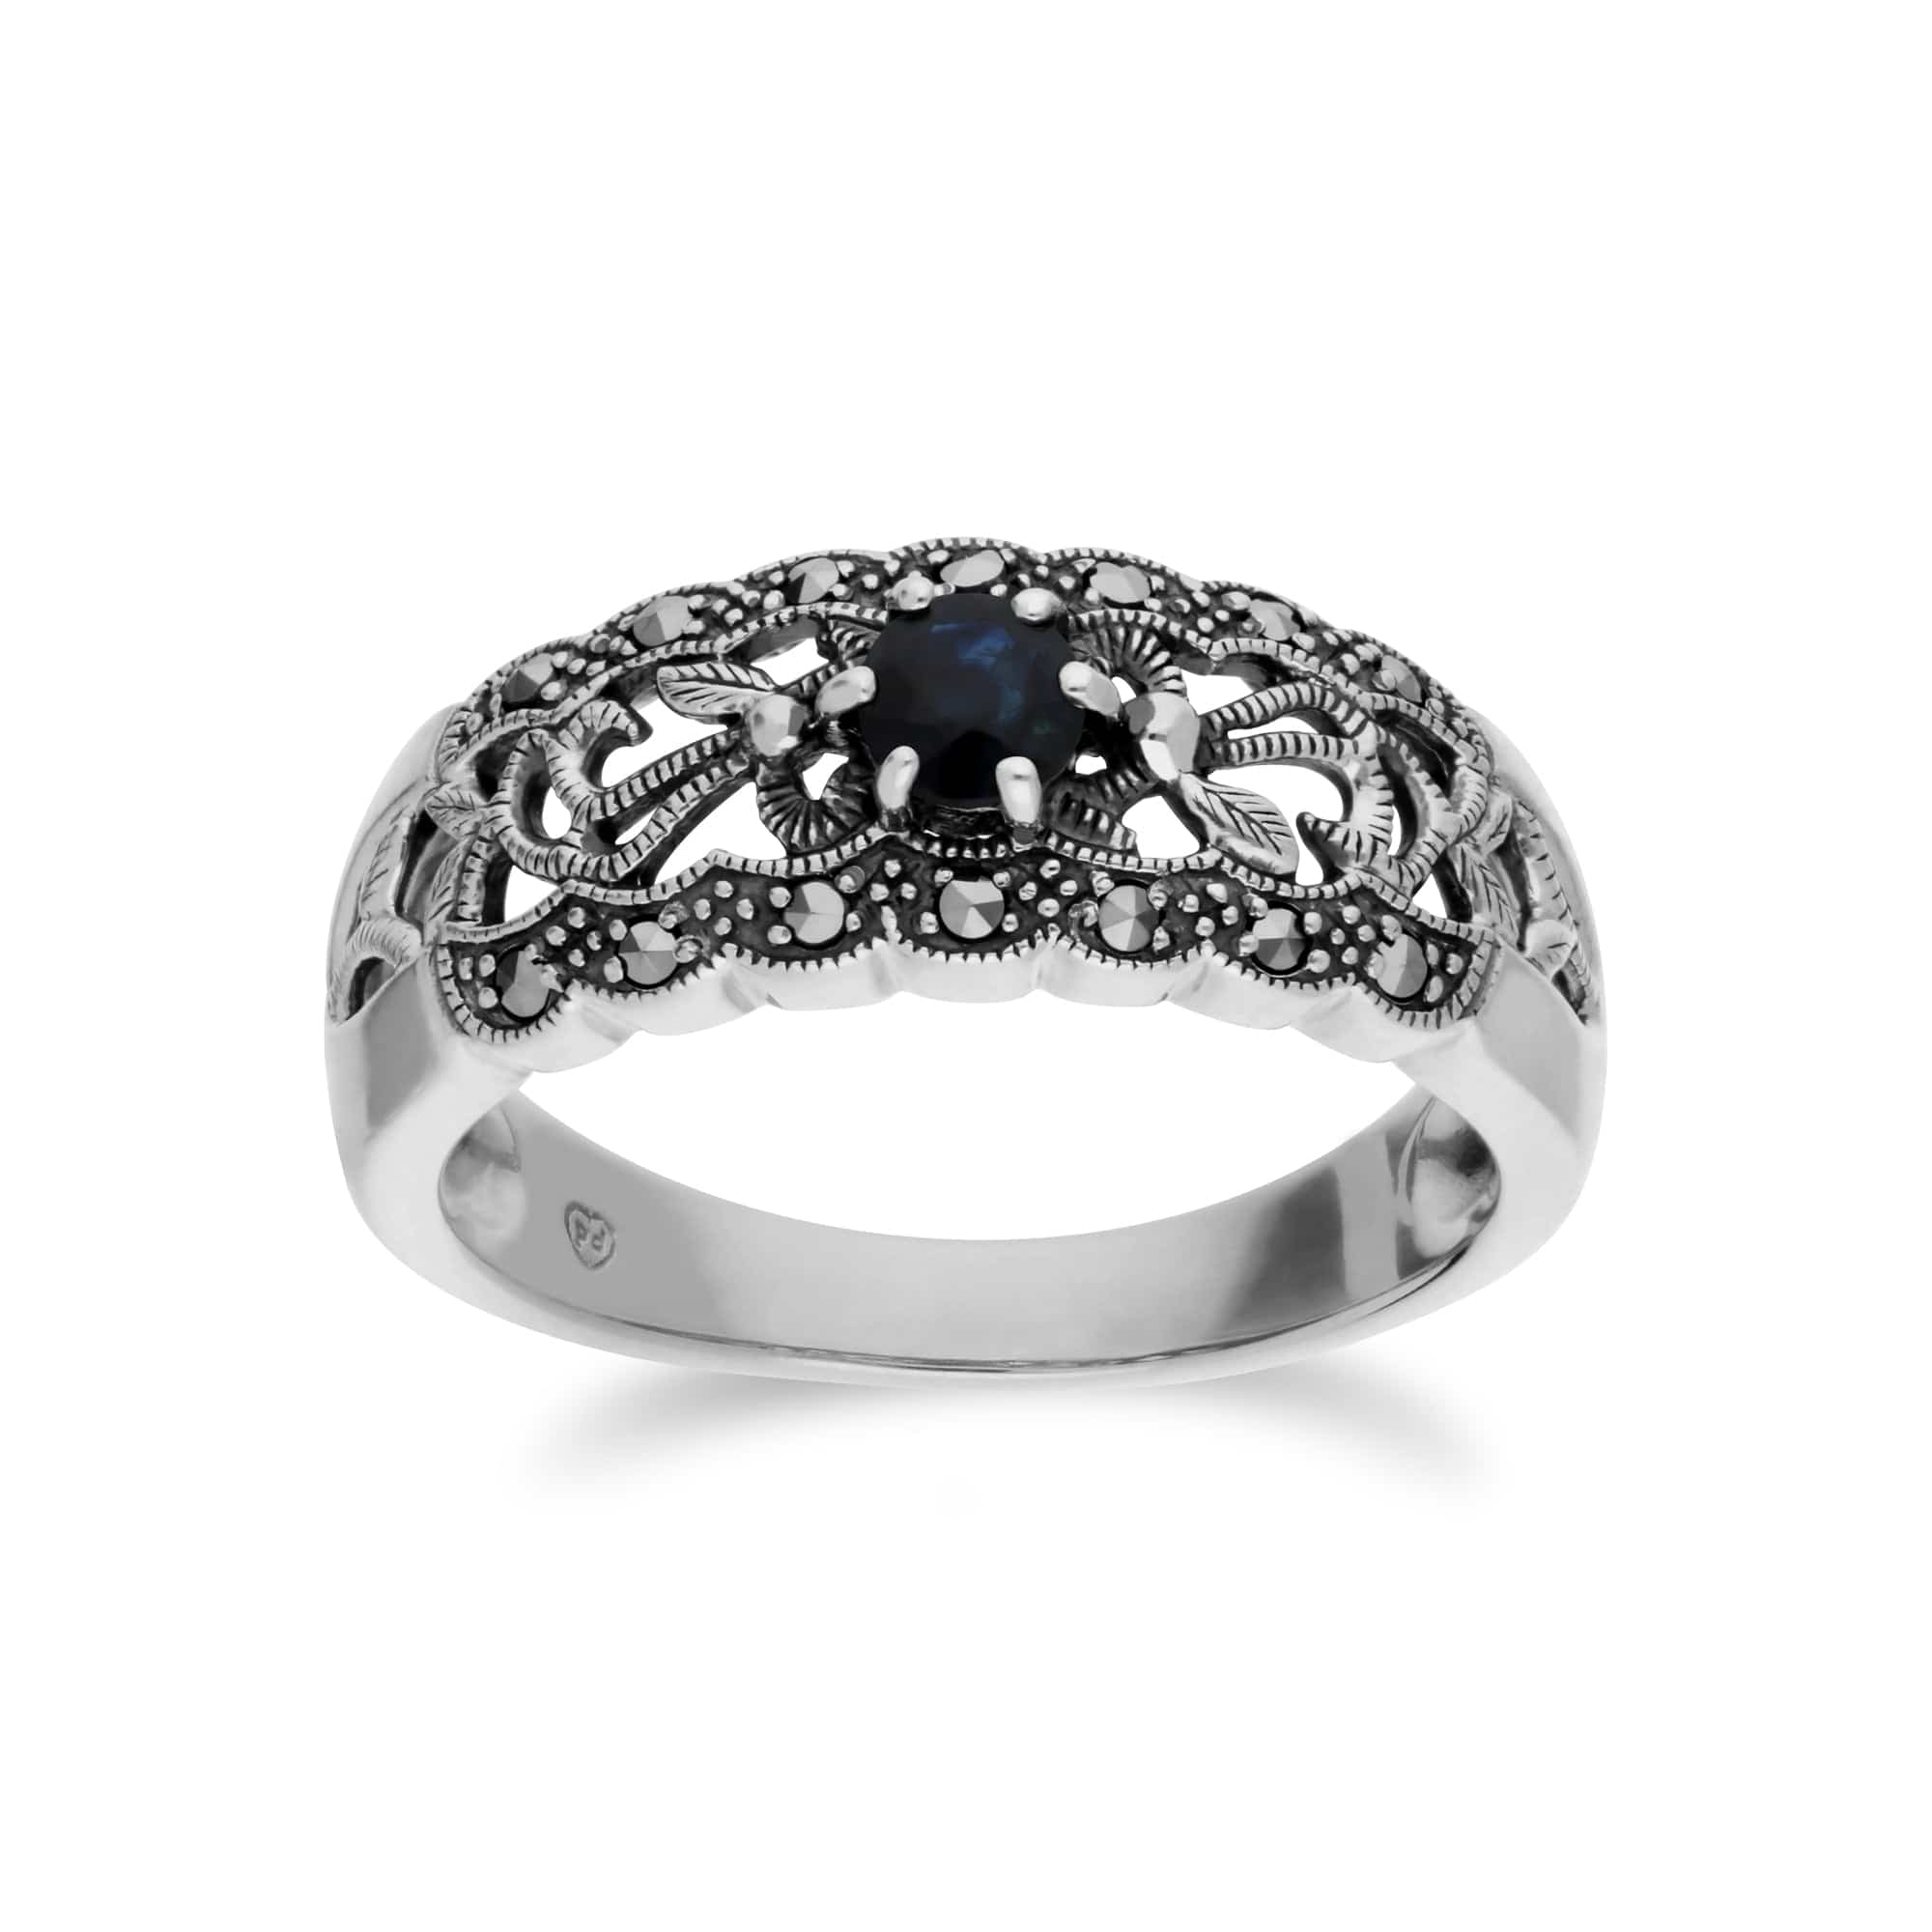 214R597704925 Art Nouveau Style Round Sapphire & Marcasite Floral Band Ring in Sterling Silver 1